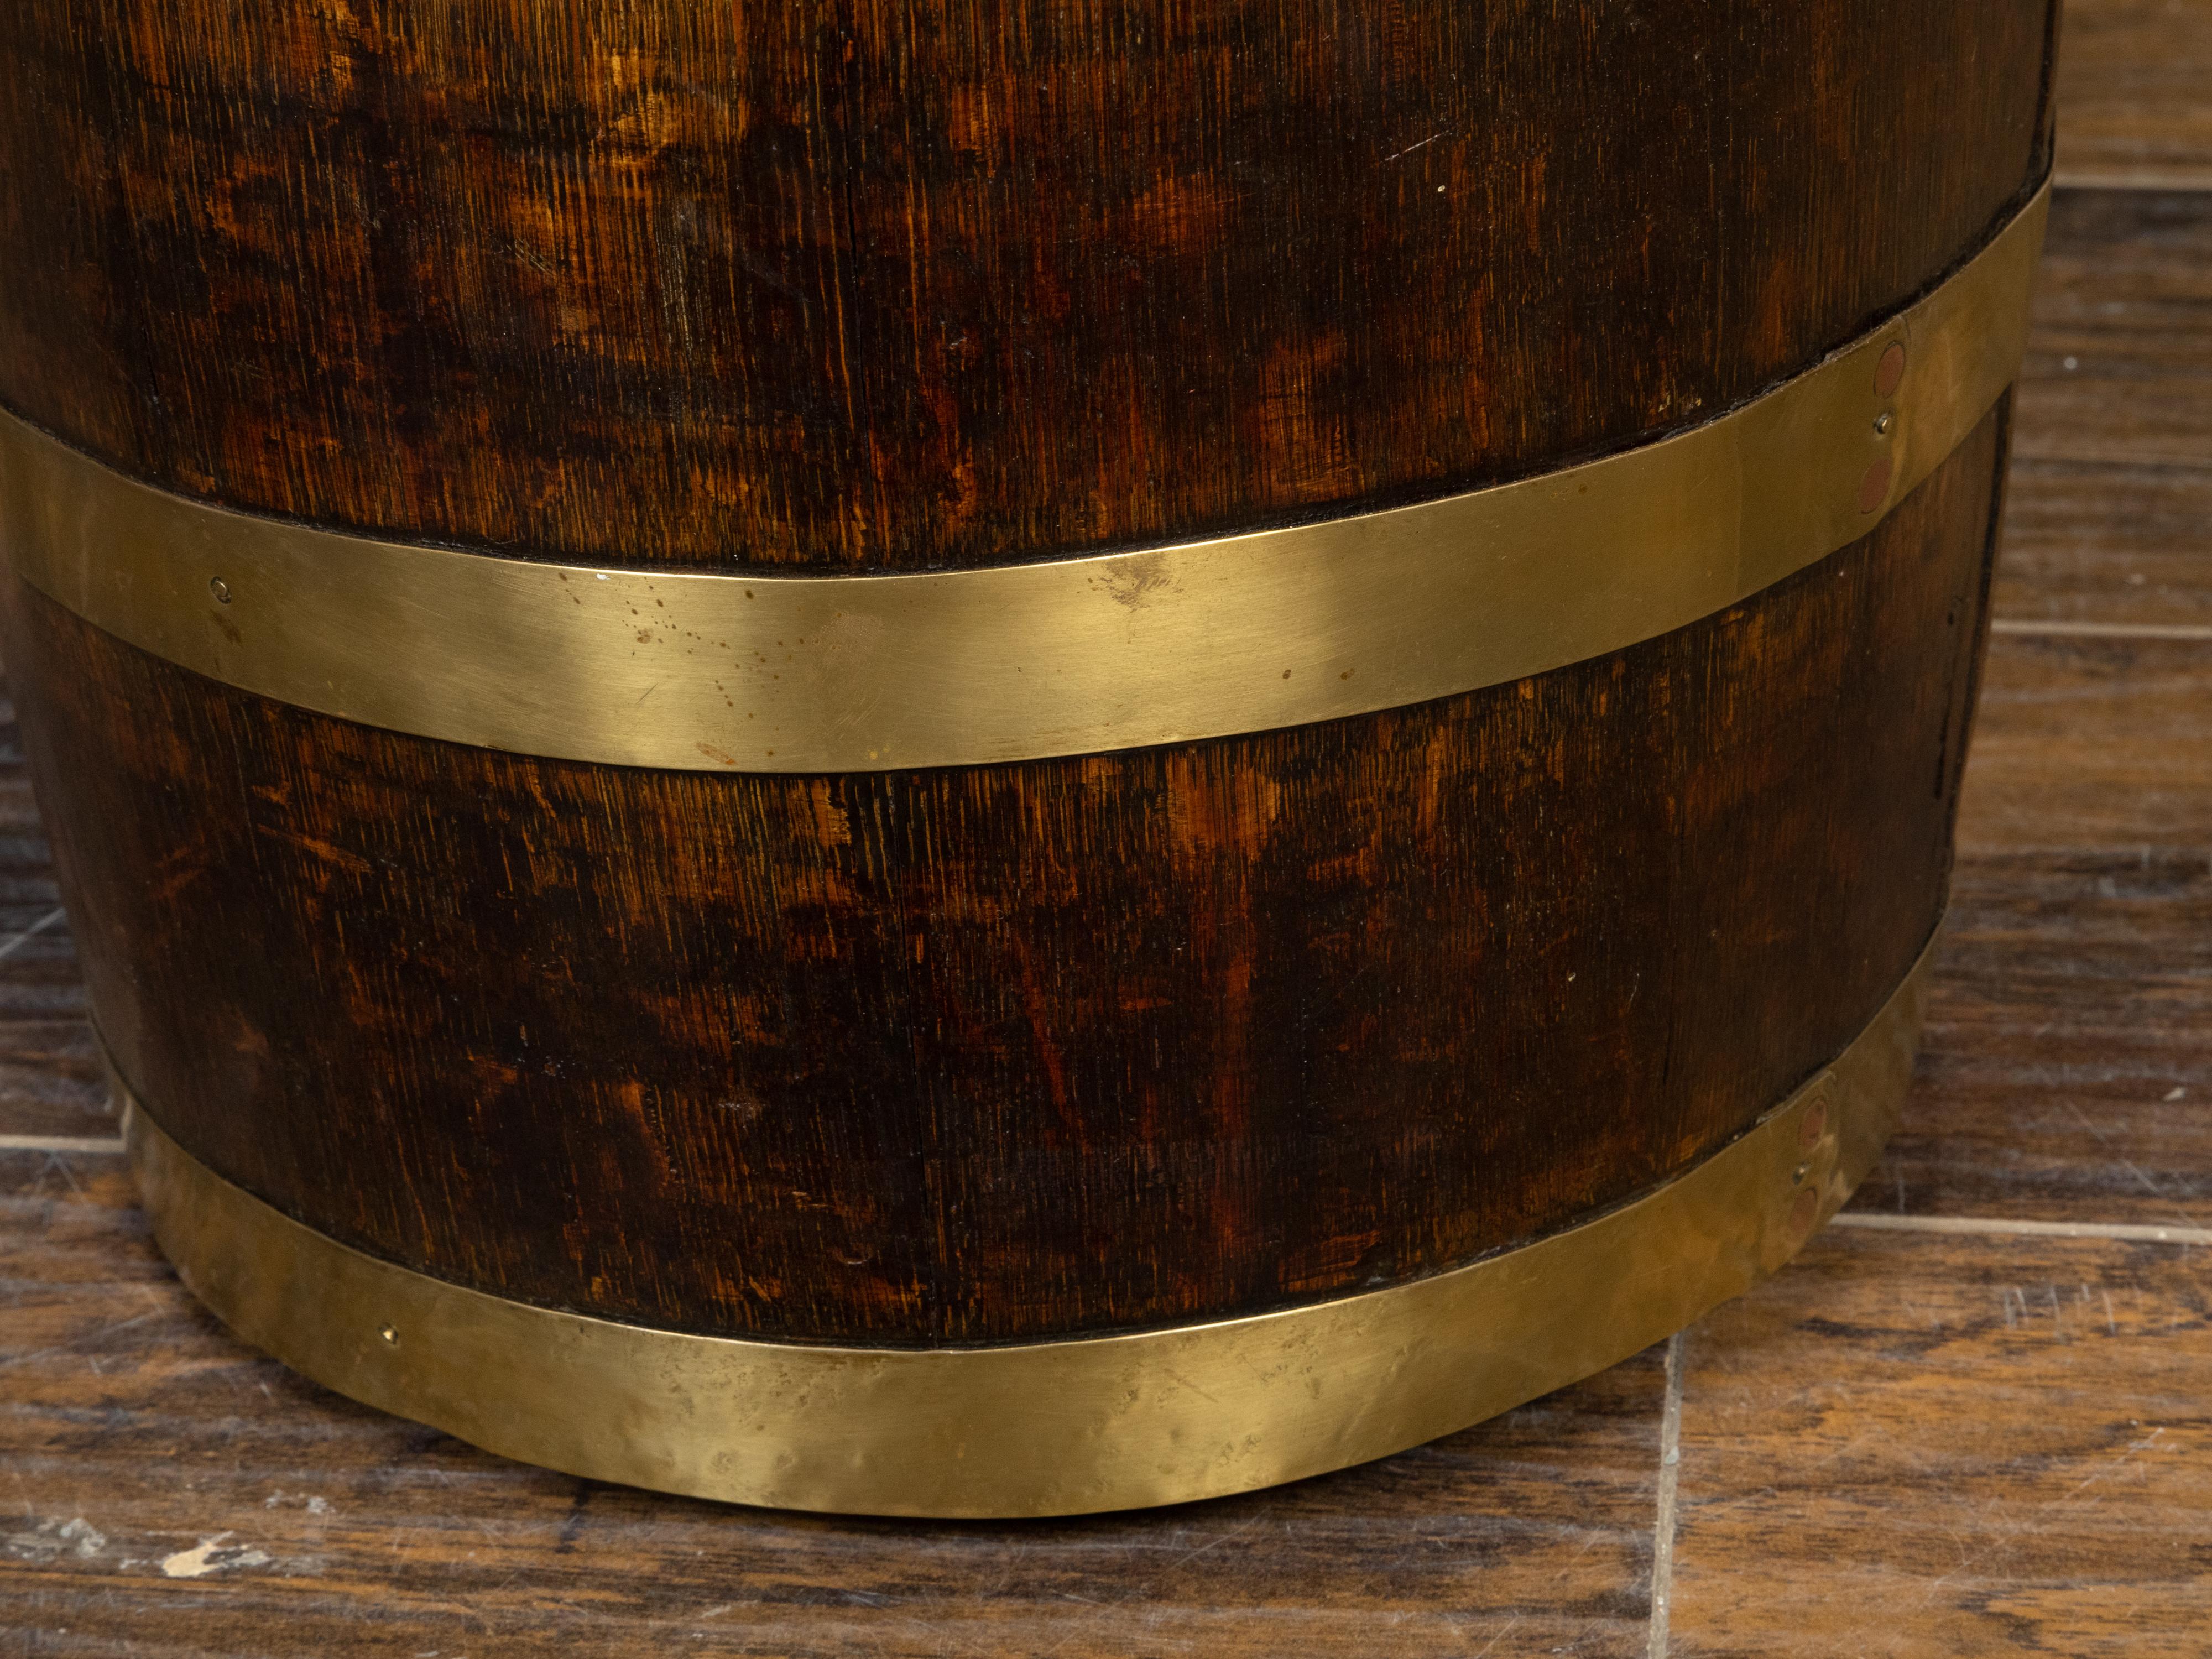 English Turn of the Century Oak Barrel with Brass Braces, circa 1900 For Sale 5